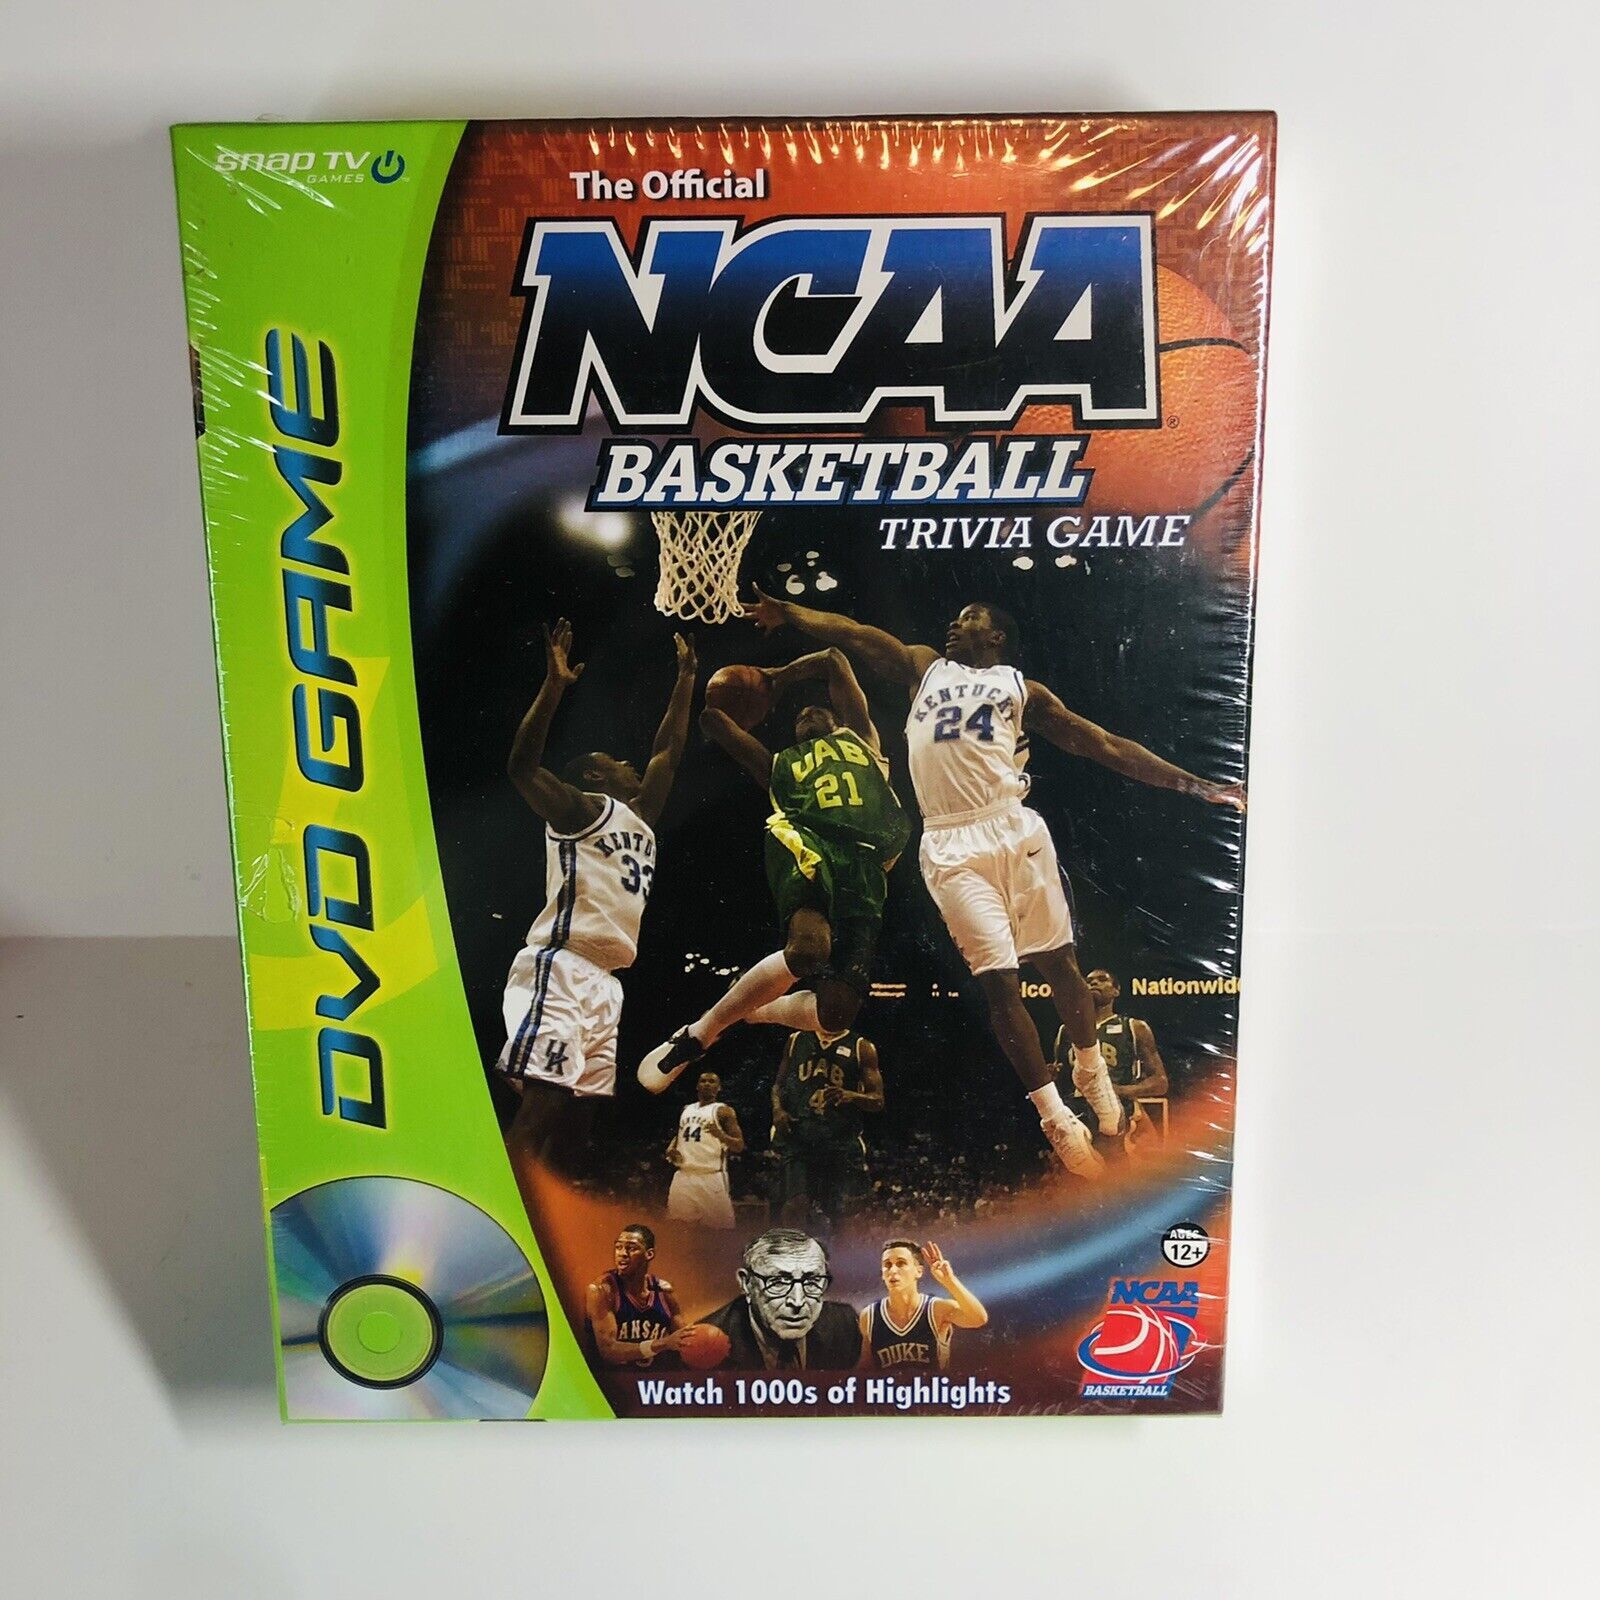 NCAA Basketball Trivia DVD Game NEW SEALED Sports Knowledge Family Game TV Play - $4.99